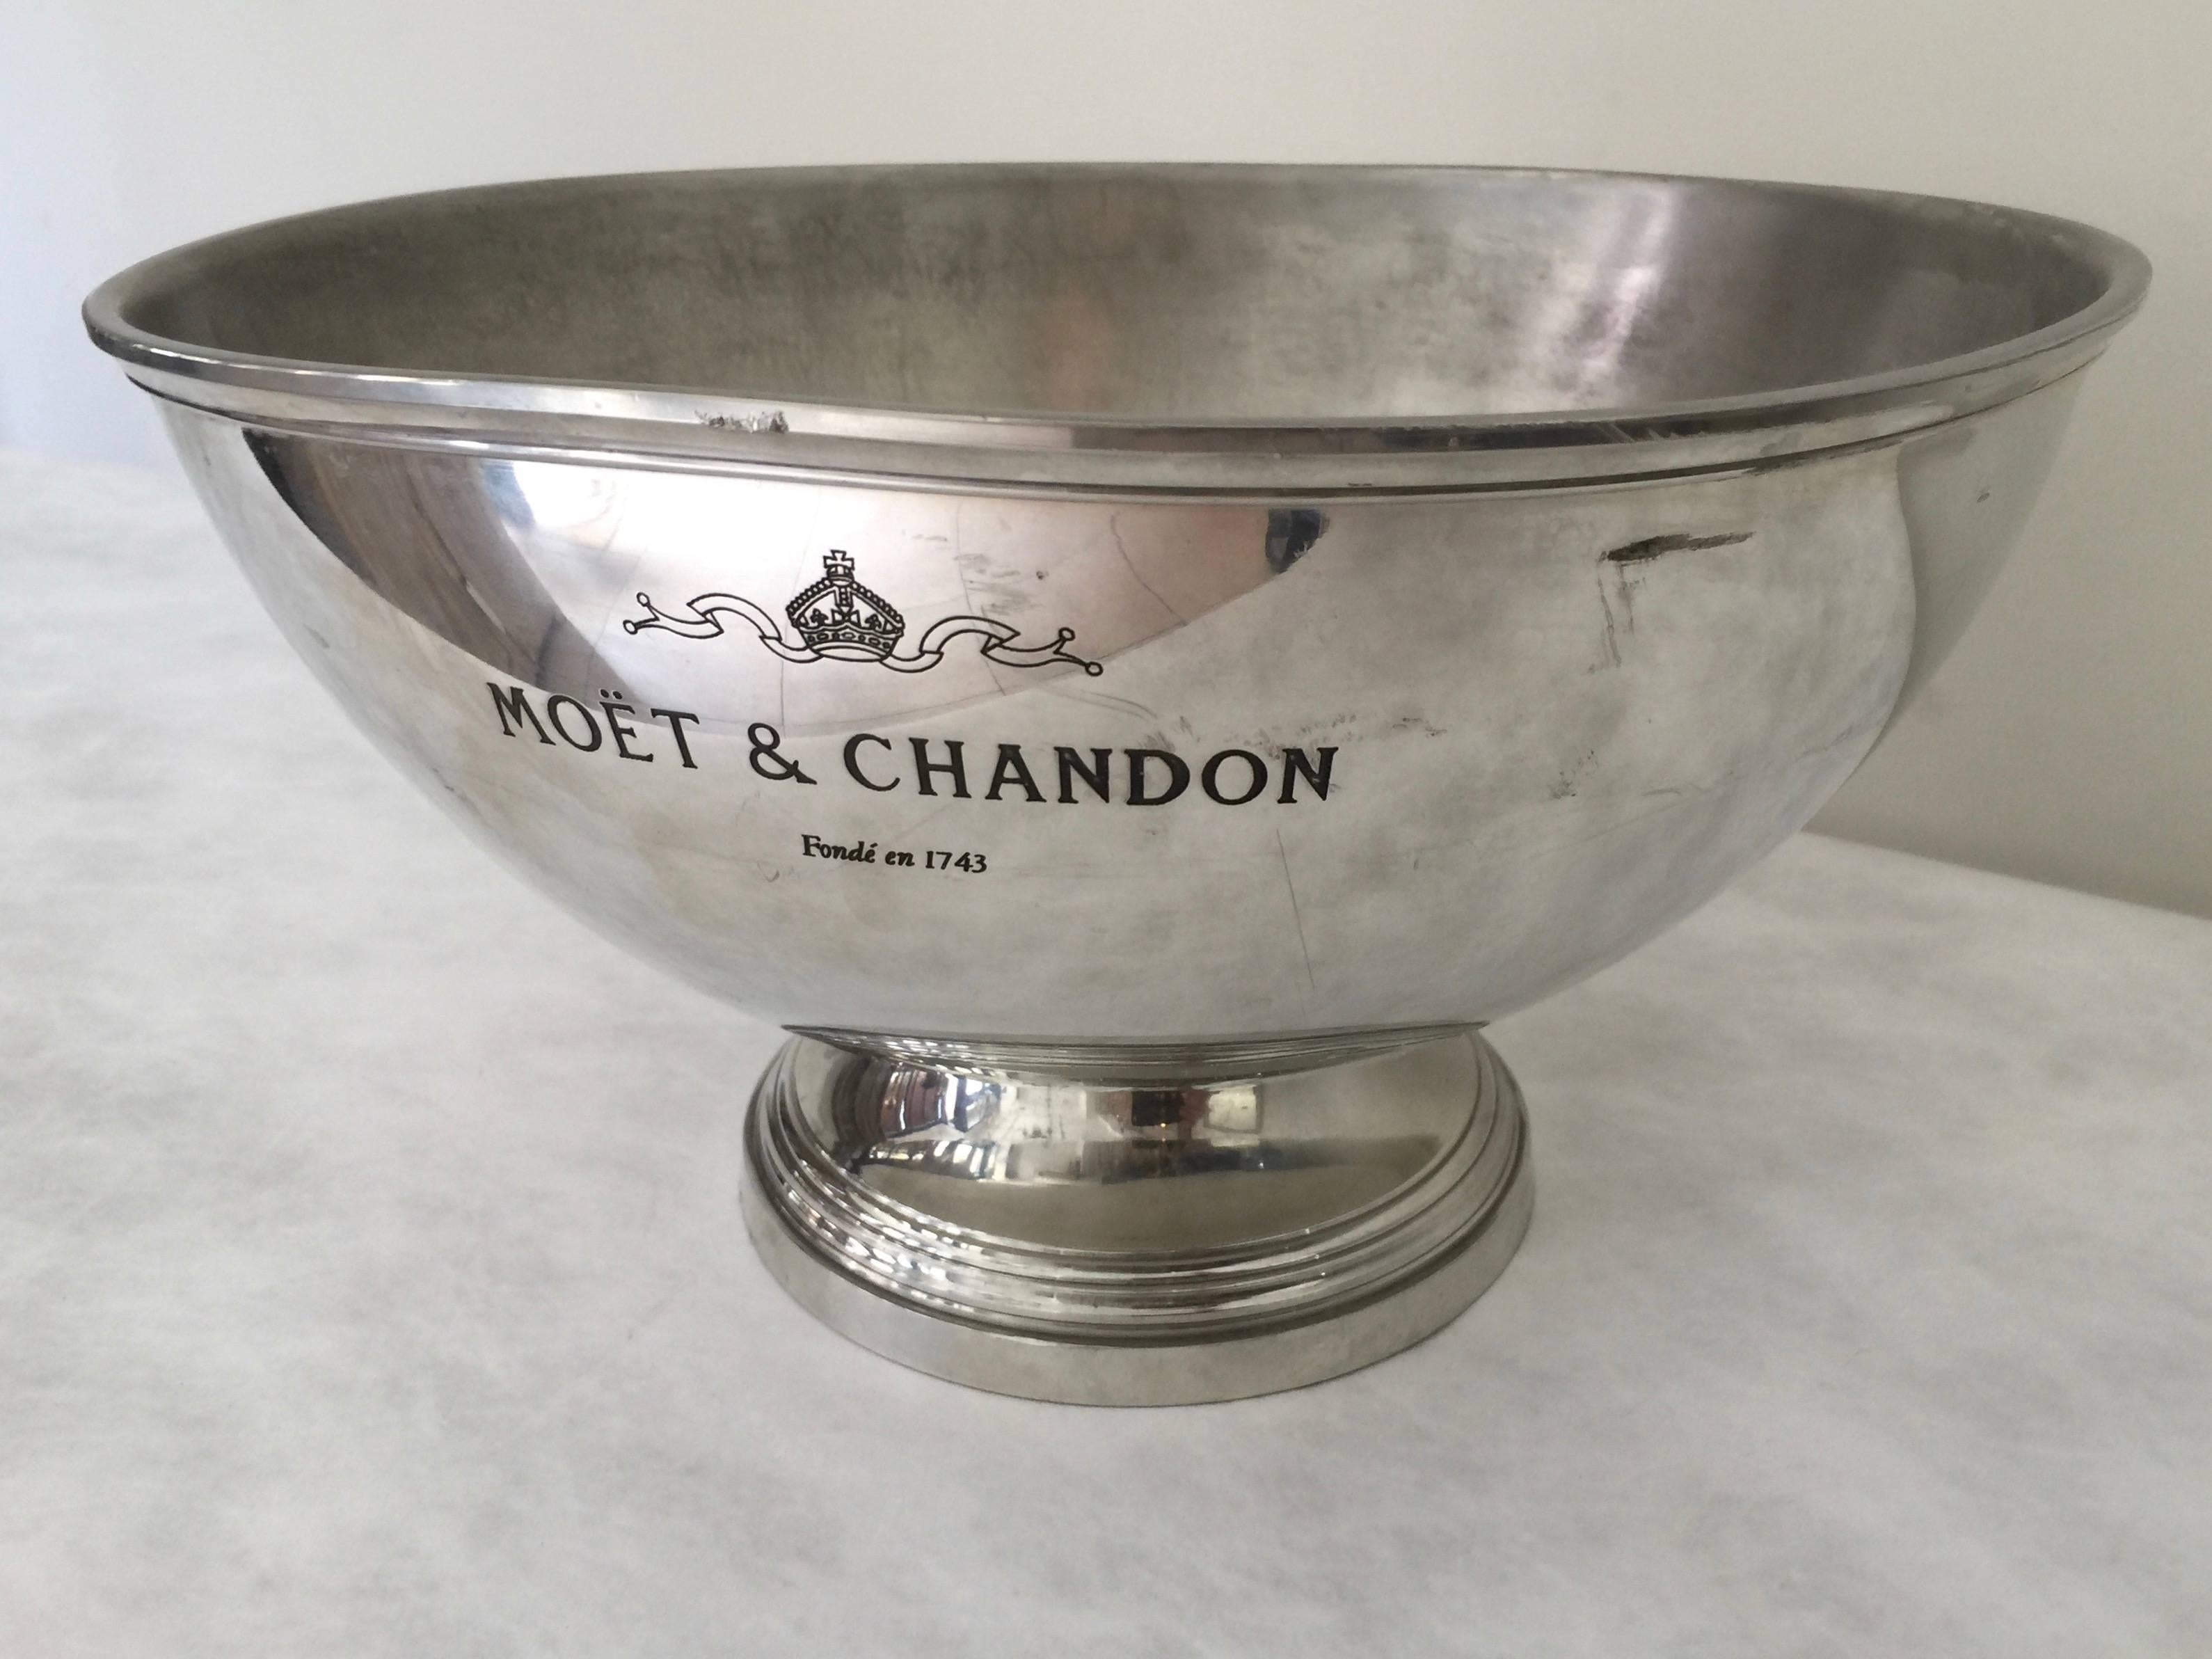 Vintage French champagne coolers from 1940-1950 in worn pewter, nickel or silver plate and feature the inscriptions along the sides 